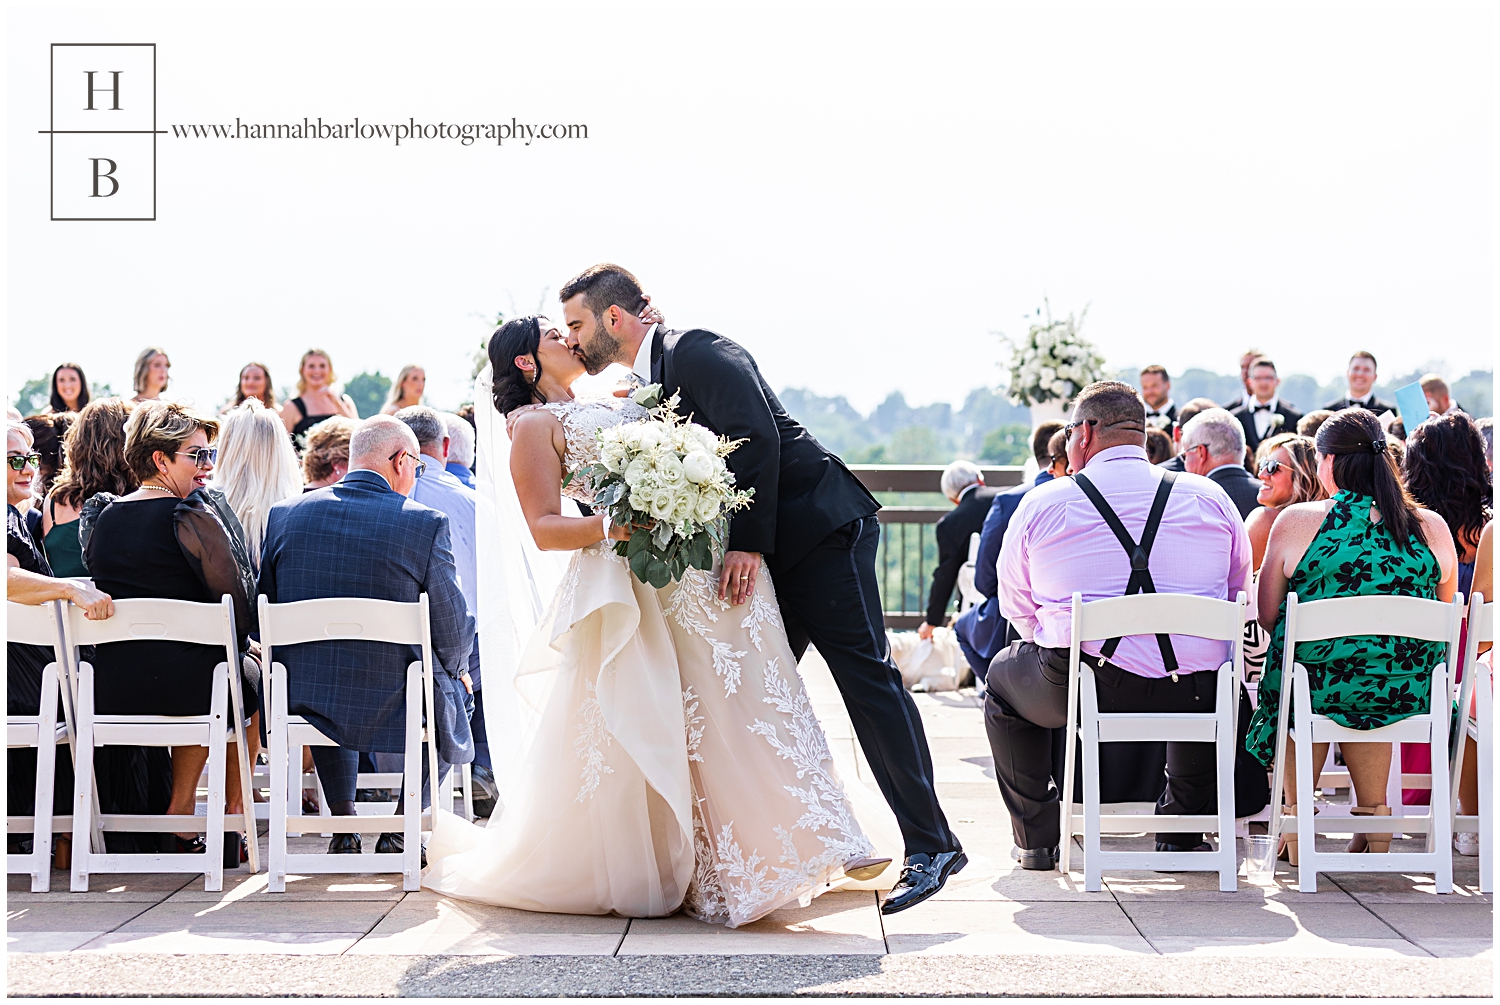 Couple dips for kiss at end of aisle at outdoor patio ceremony.